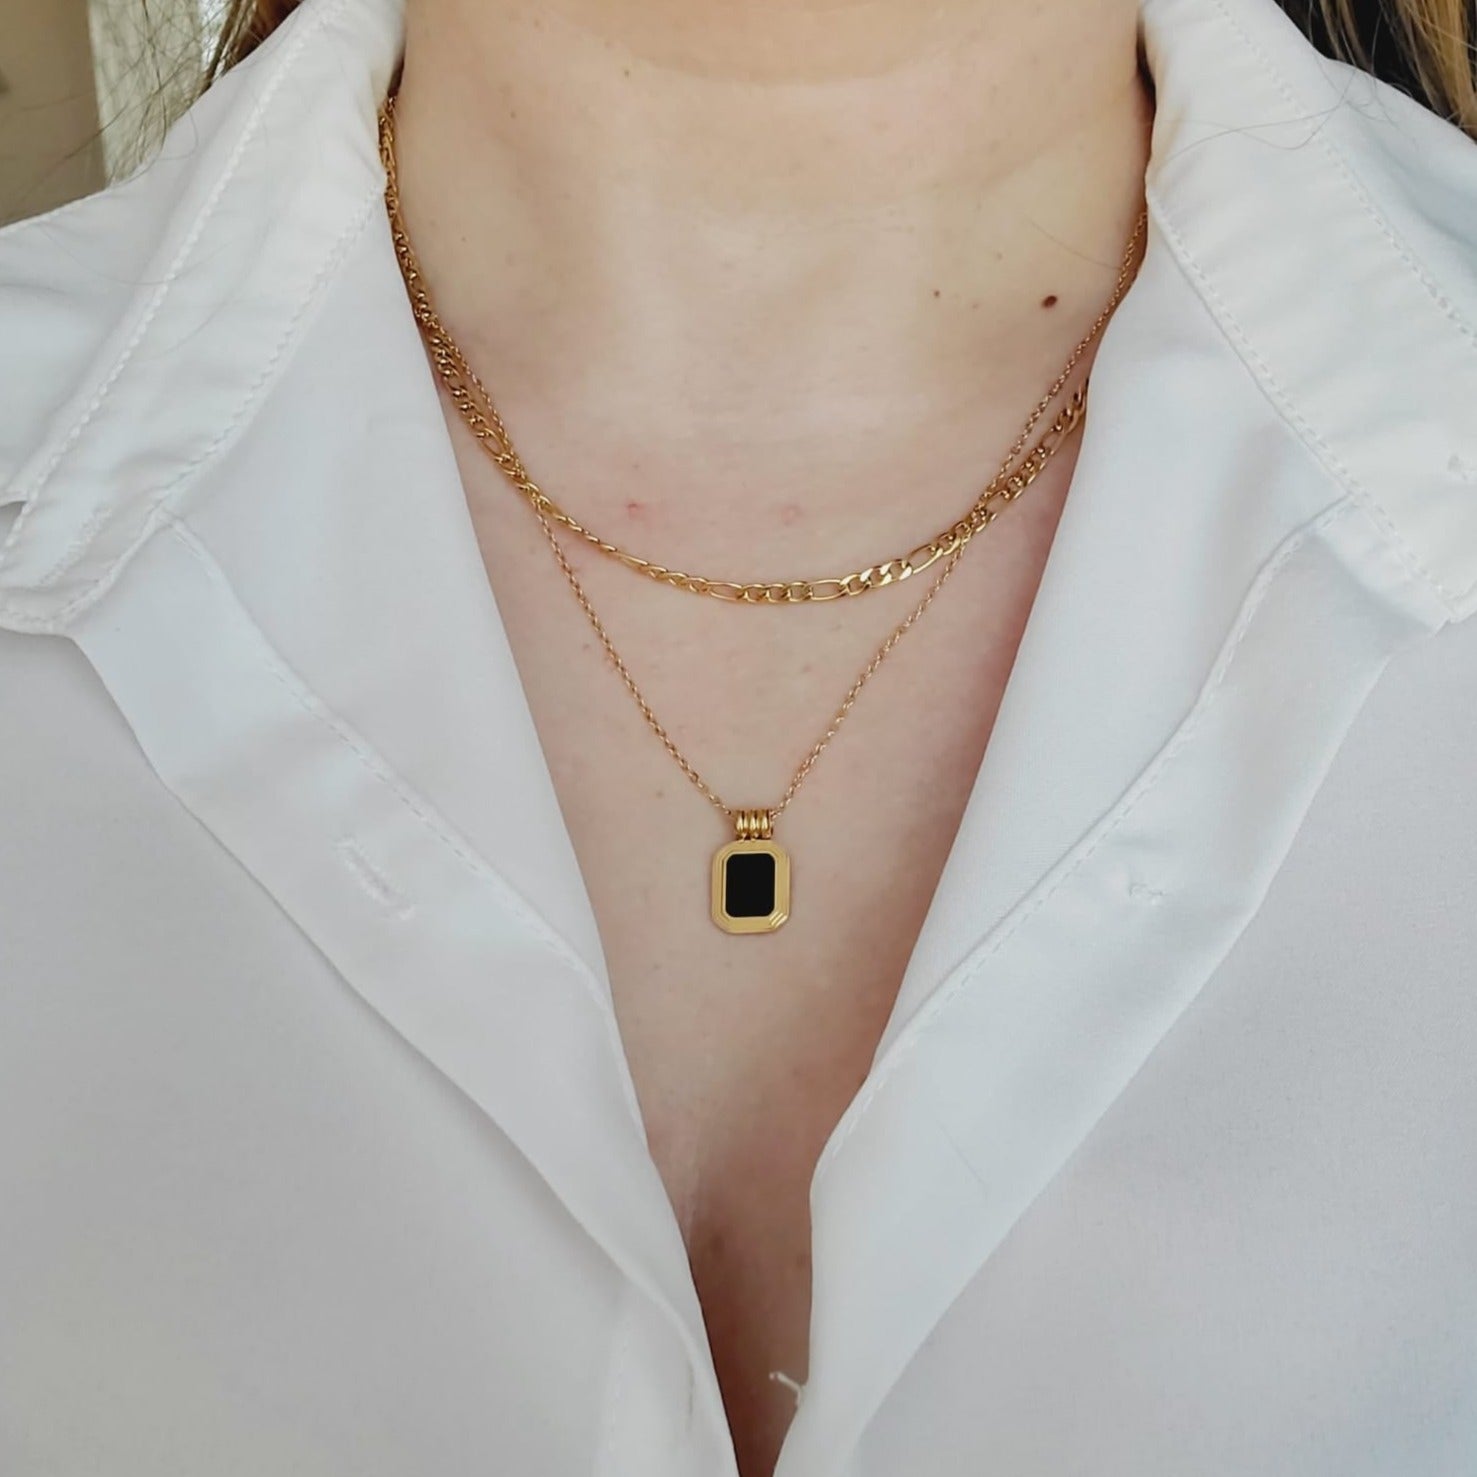 Minimalist chain, Gold filled Chain, Flat Gold Necklace, Snake Chain, Water resistant jewelry, water resistant Necklace, Water resistant bracelet, vintage jewelry, vintage jewelry, vintage necklace, 14k gold necklace, 14k gold jewelry, 14k gold necklace, fine jewelry, fine necklace, fine bracelet, snake gold necklace, bold necklace, bold jewelry, handmade jewelry, fine jewelry brand